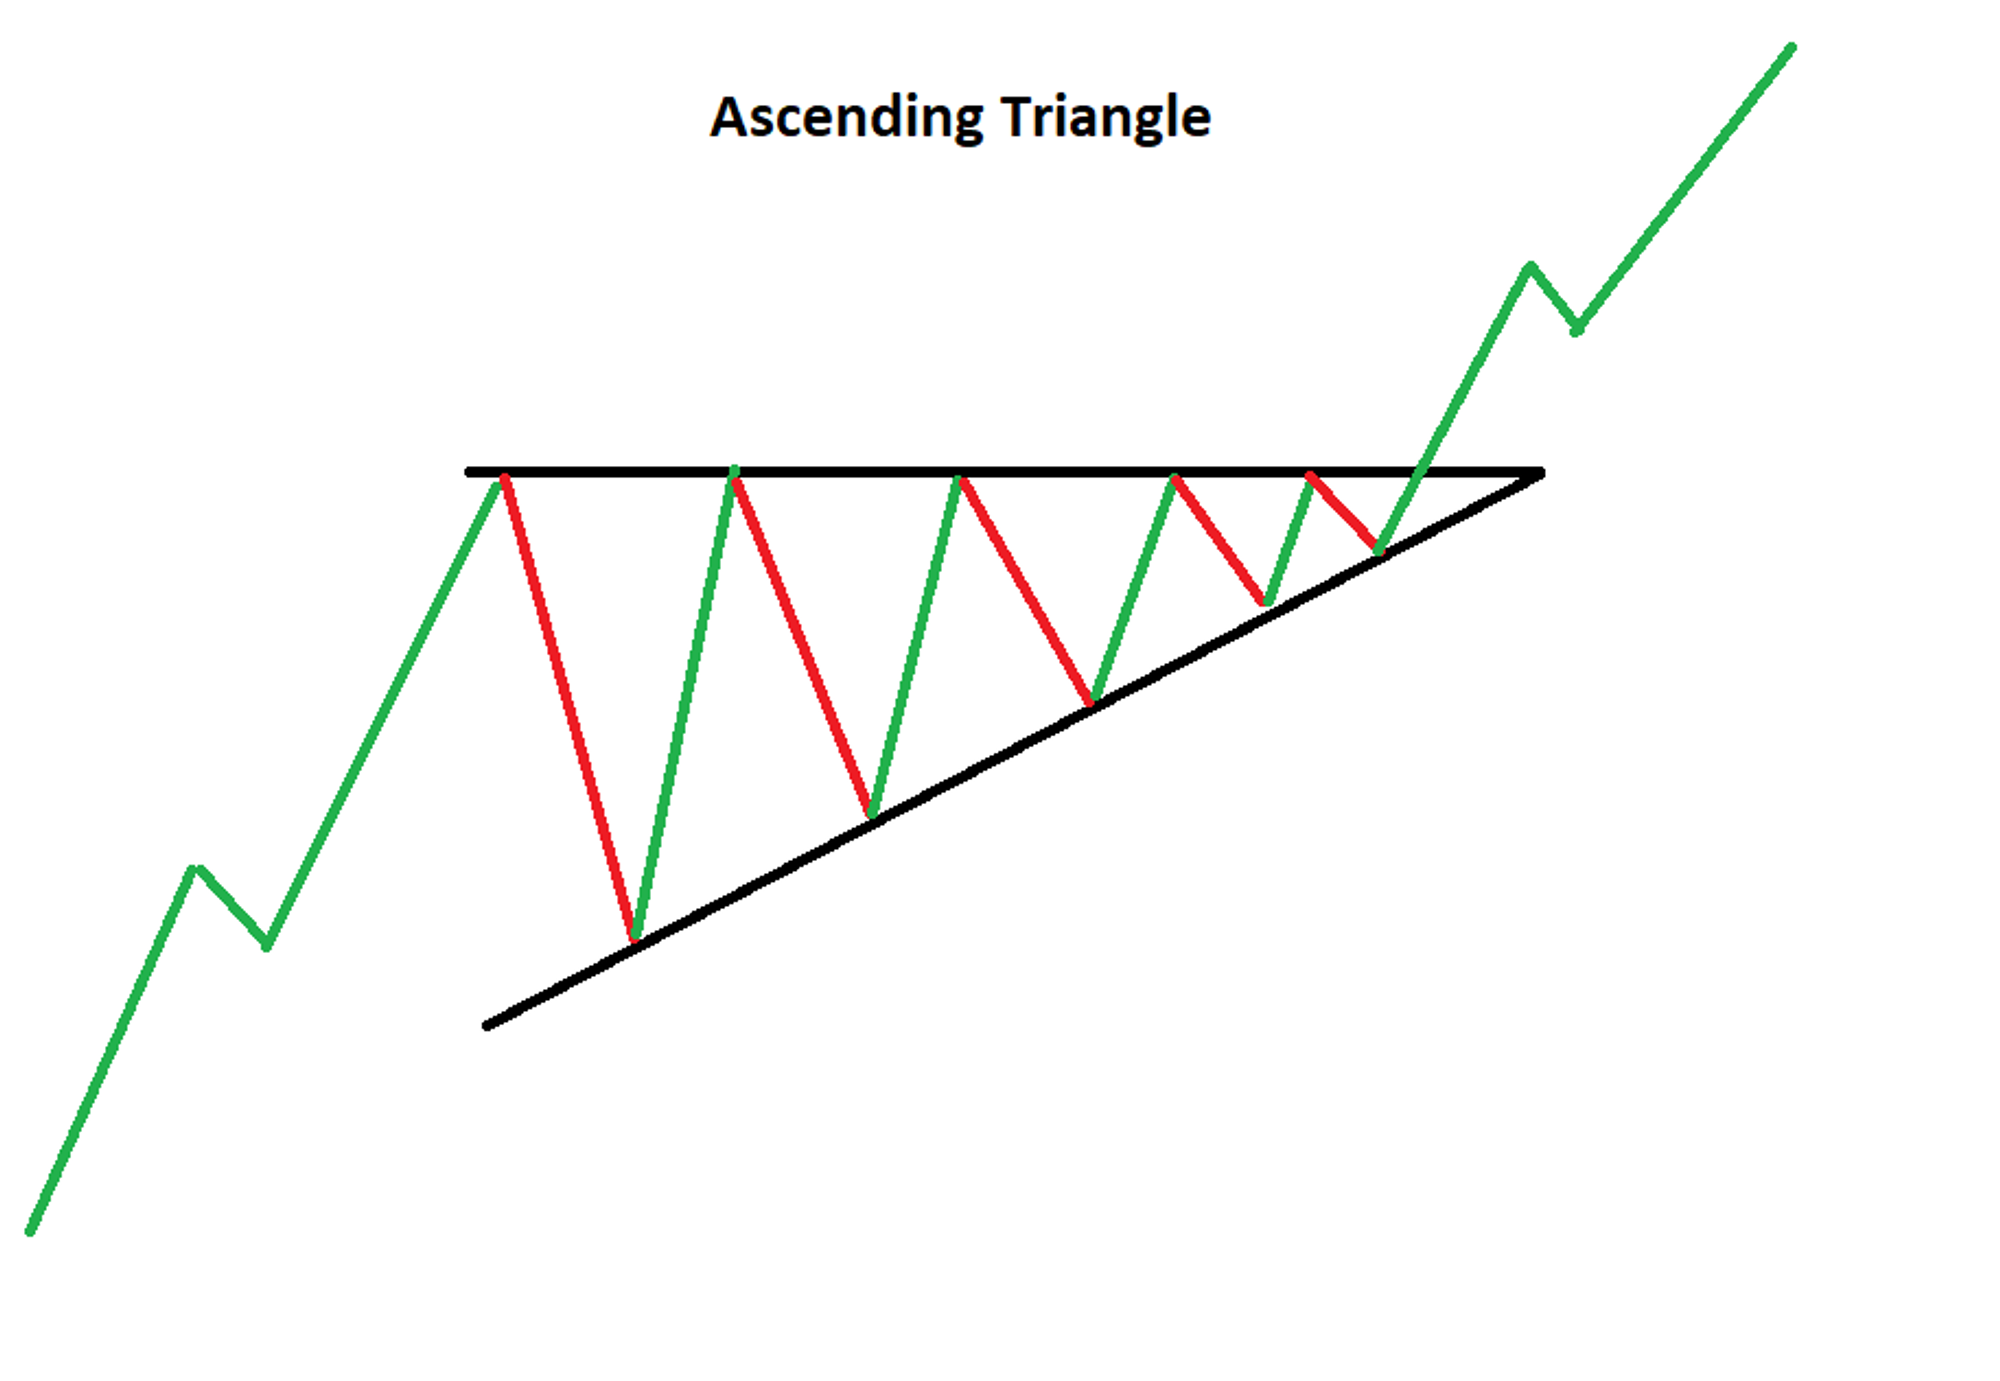 Ascending triangle pattern - Continuation pattern